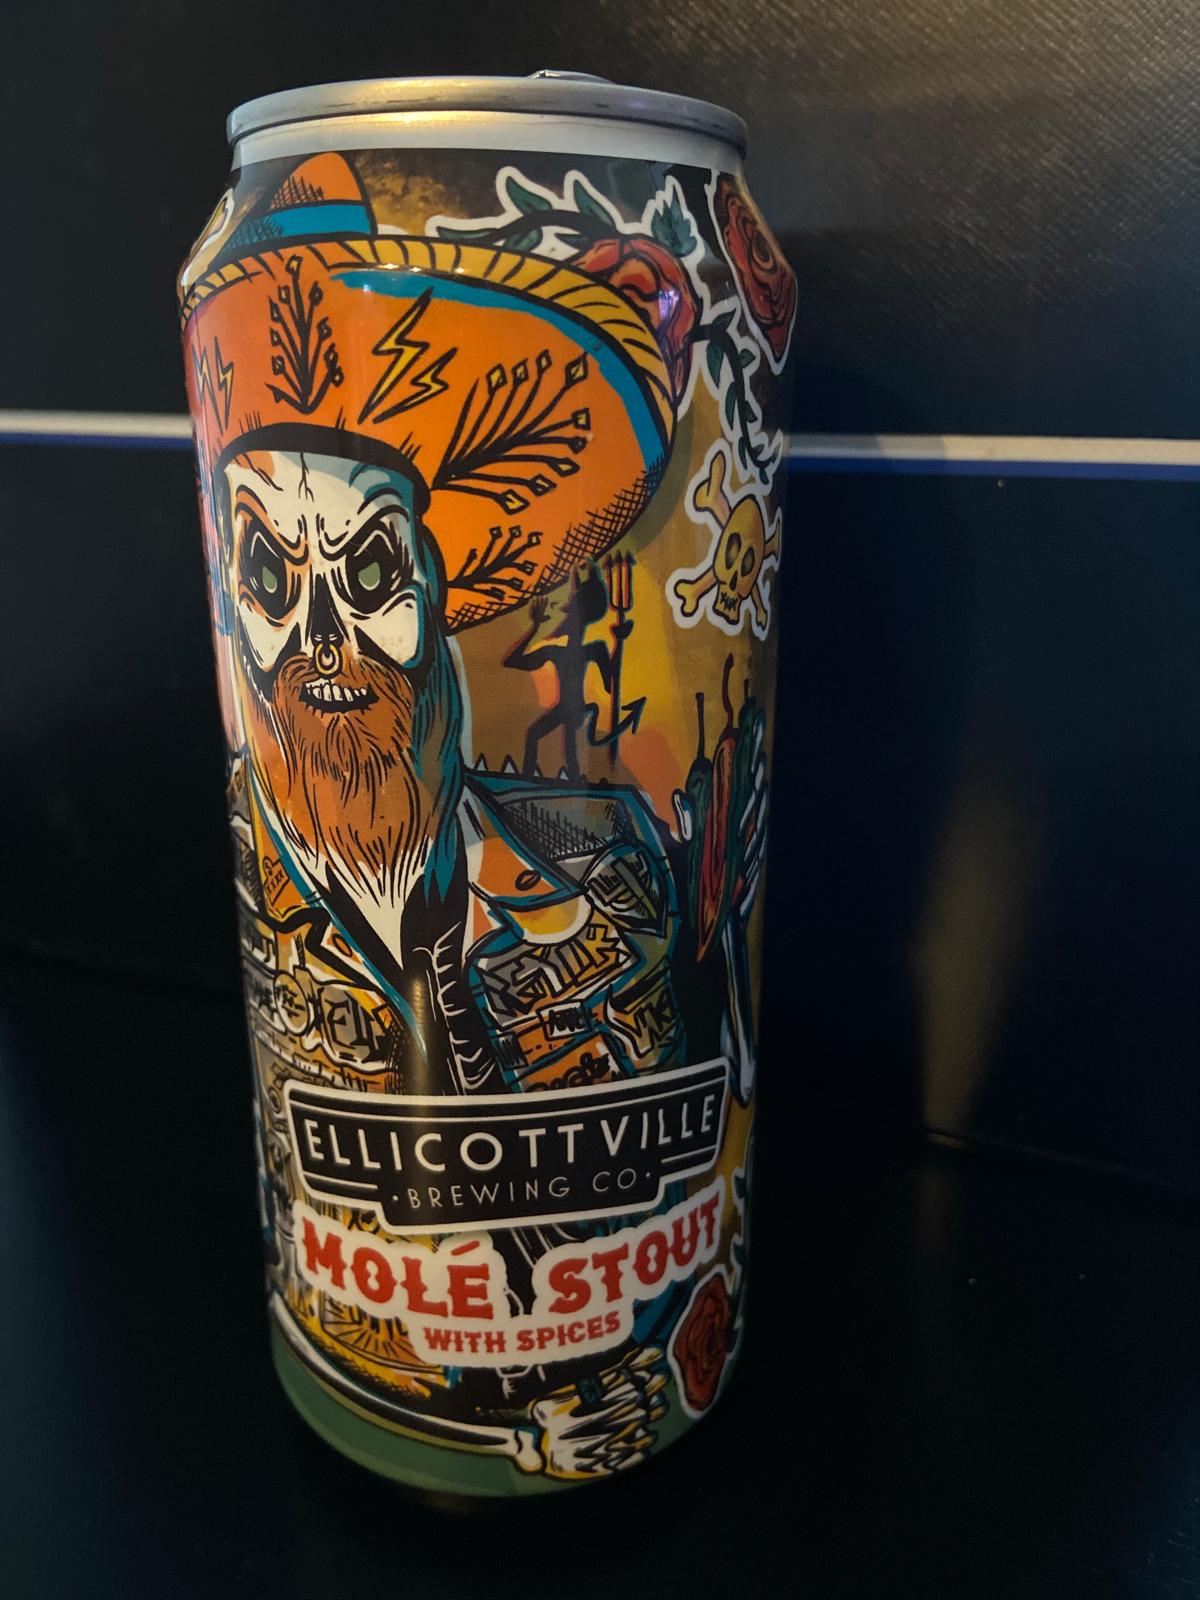 Mole Stout With Spices